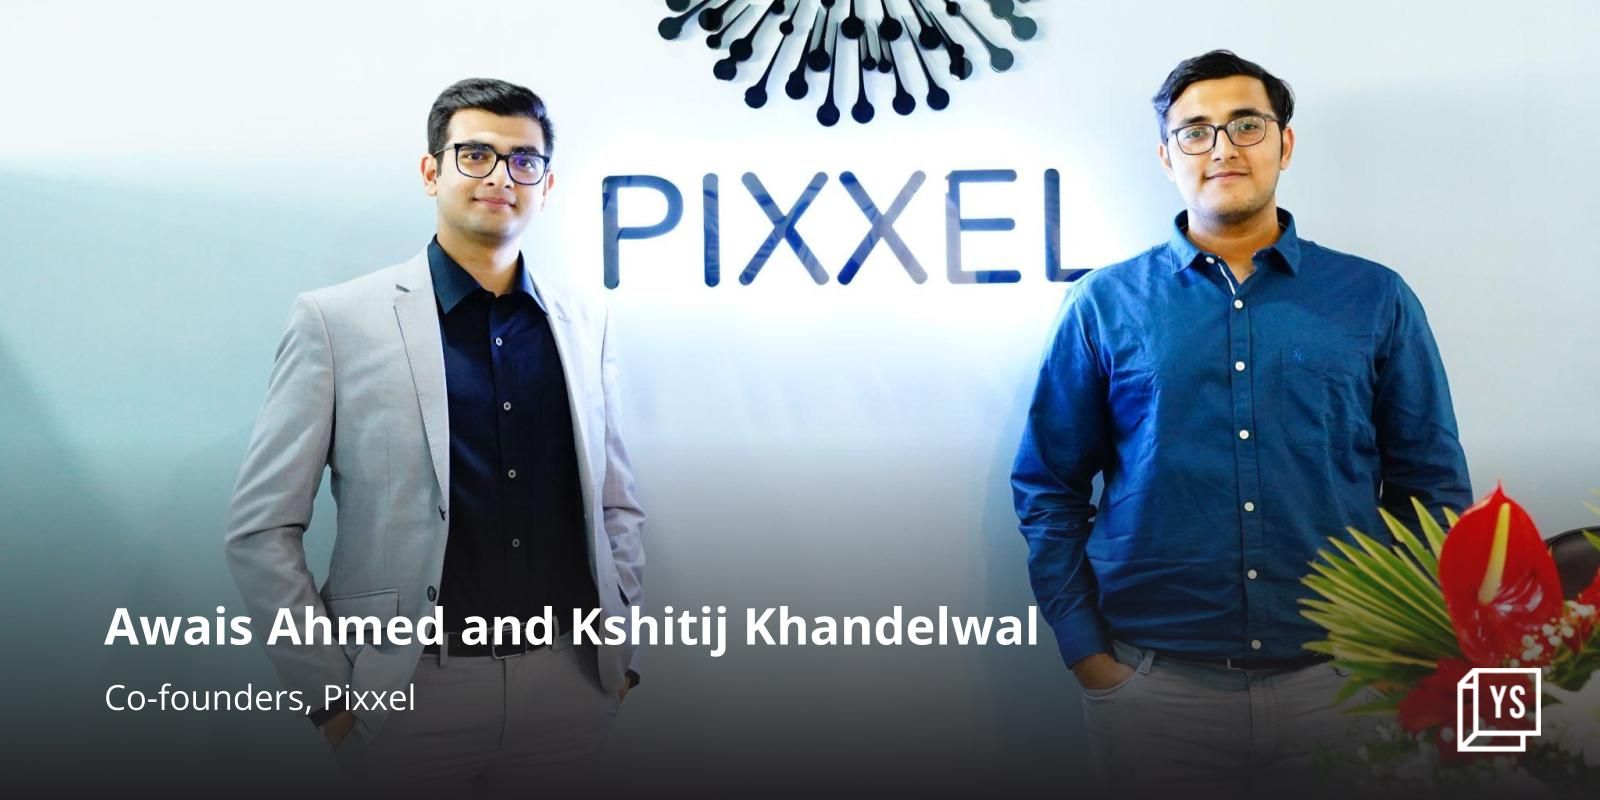 Shooting for the stars: How Pixxel is looking to make its mark in Indian space history 